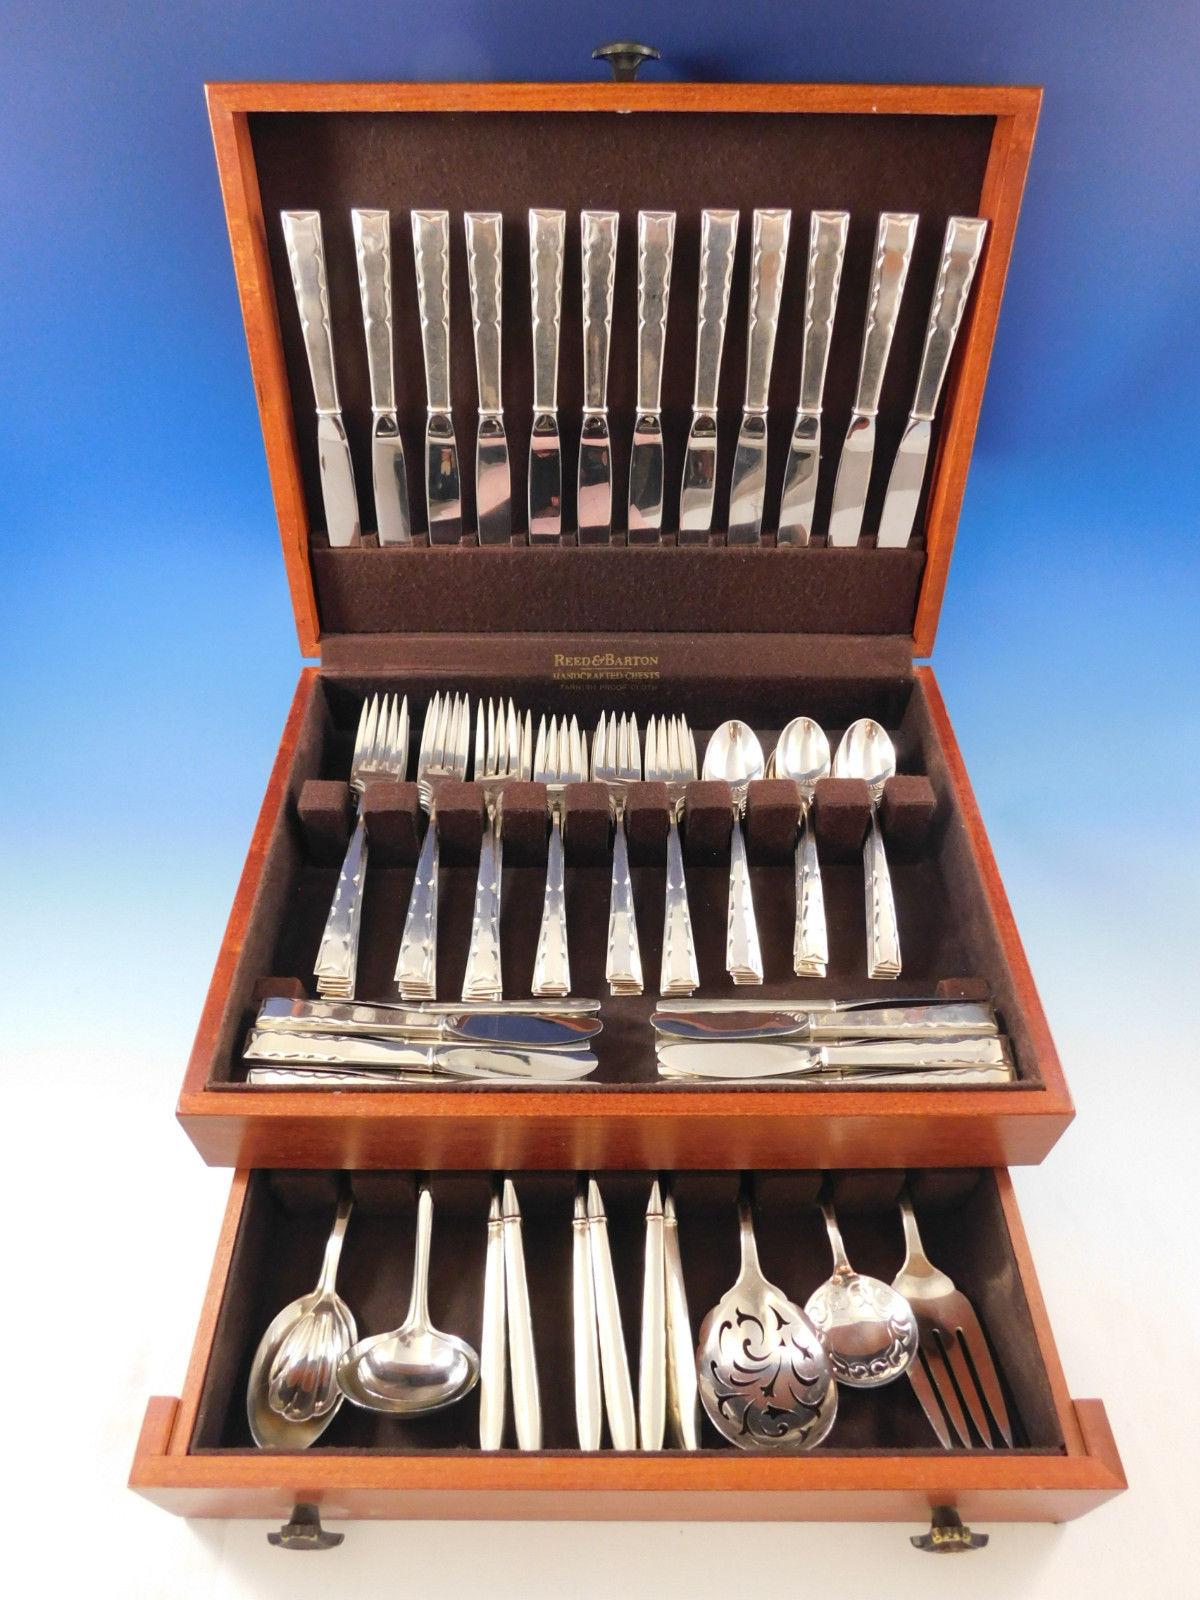 Monumental Mid-Century Modern Skylark by Kirk sterling silver Flatware set - 97 pieces. This set includes:

18 Knives, 9